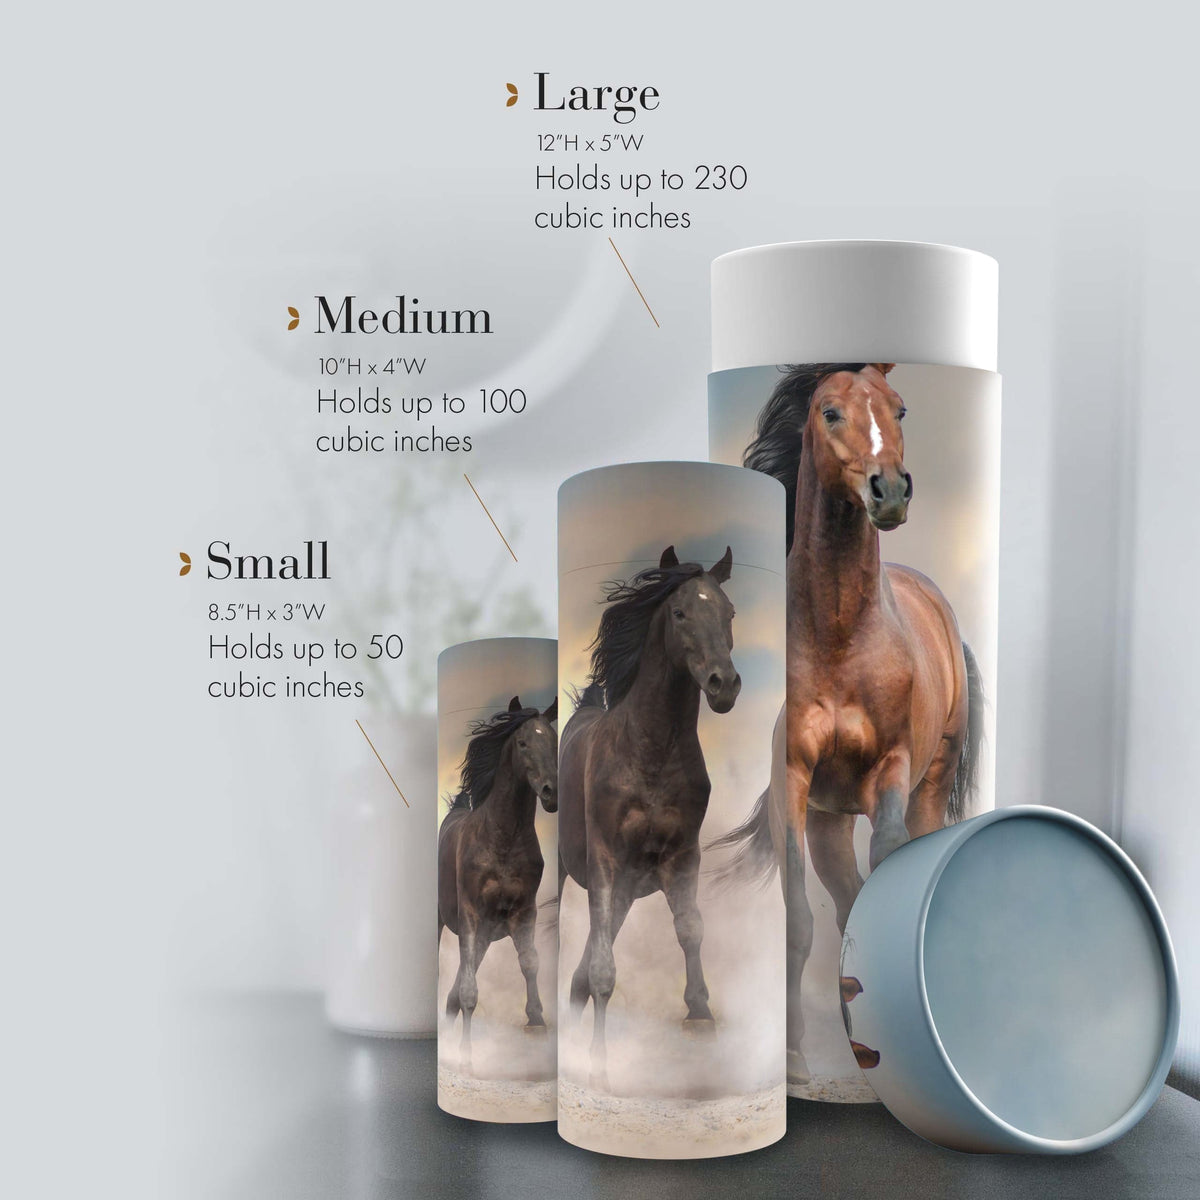 Commemorative Cremation Urns Wild Horses Biodegradable &amp; Eco Friendly Burial or Scattering Urn / Tube